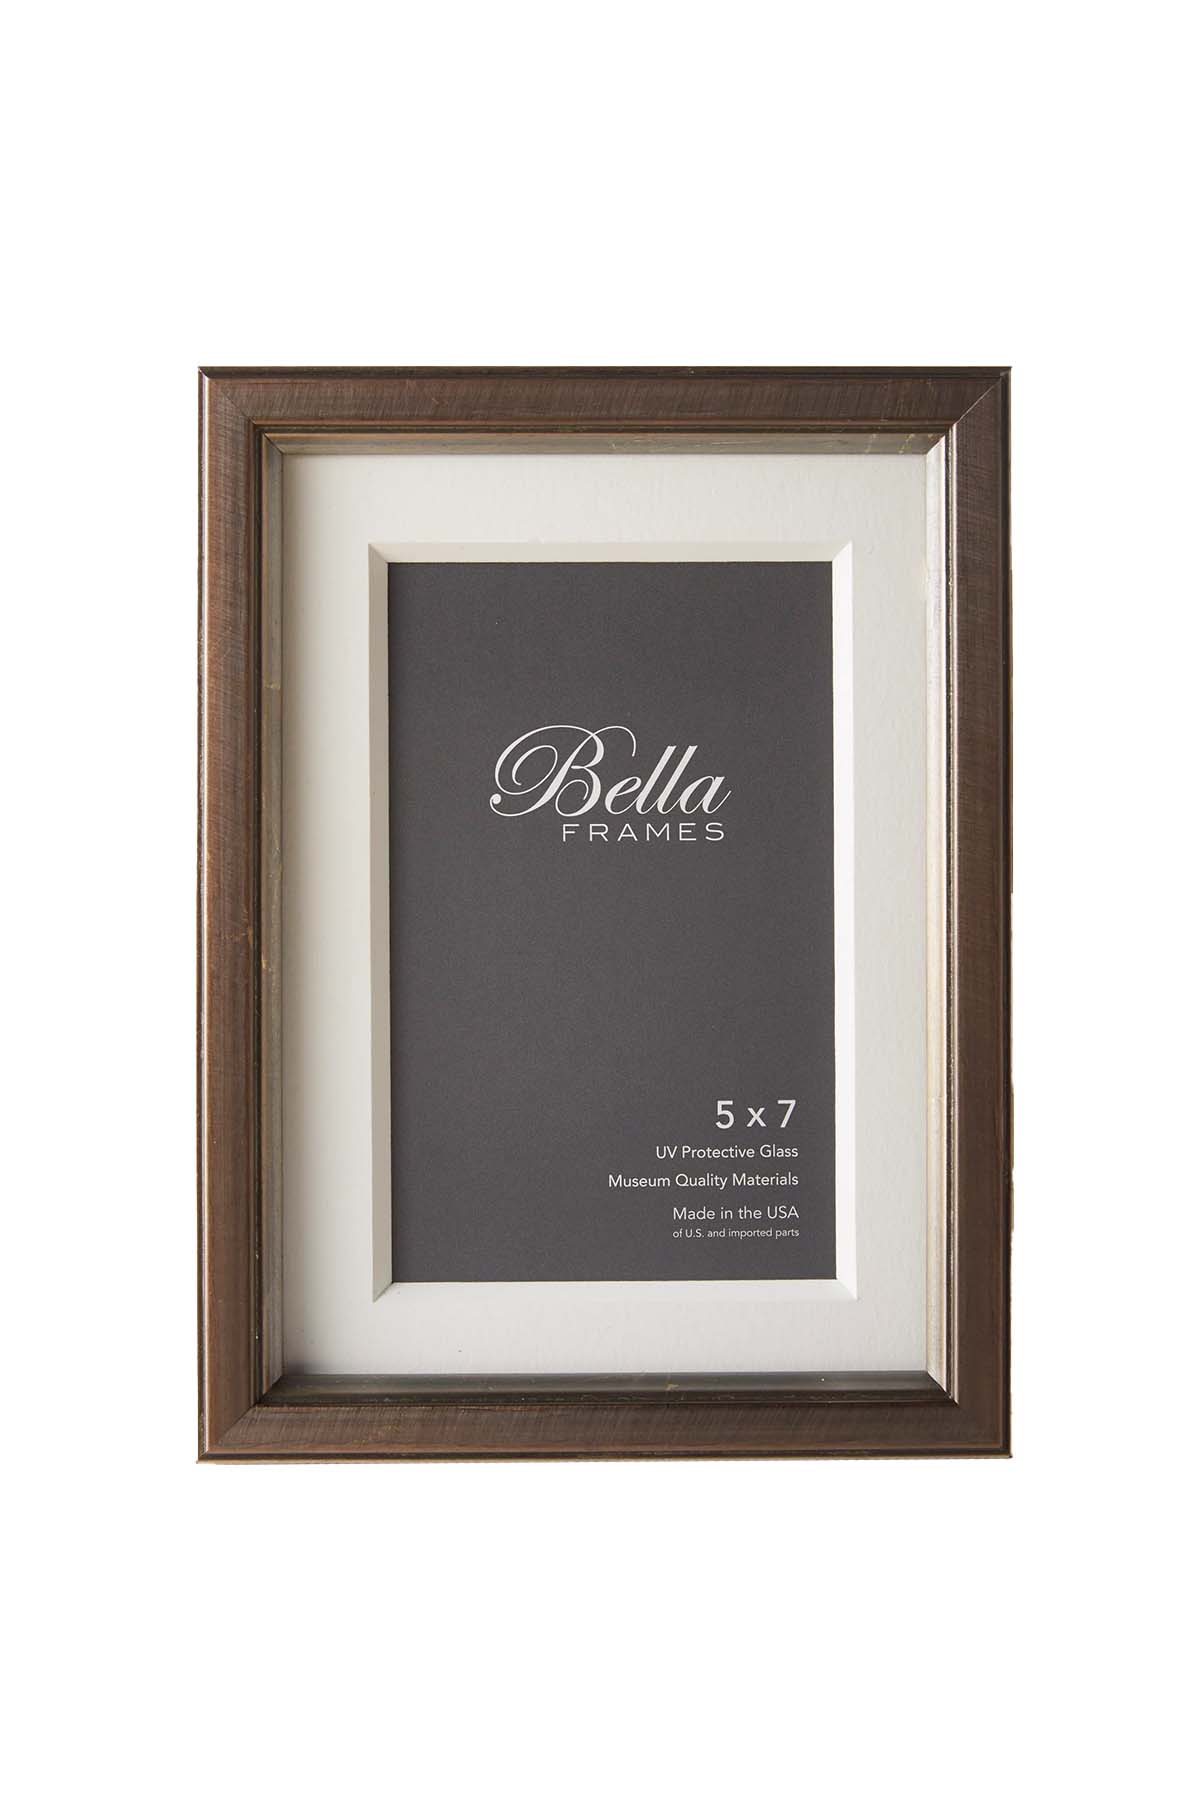 Brancui Piombo 5x7 pewter-colored frame - Front view